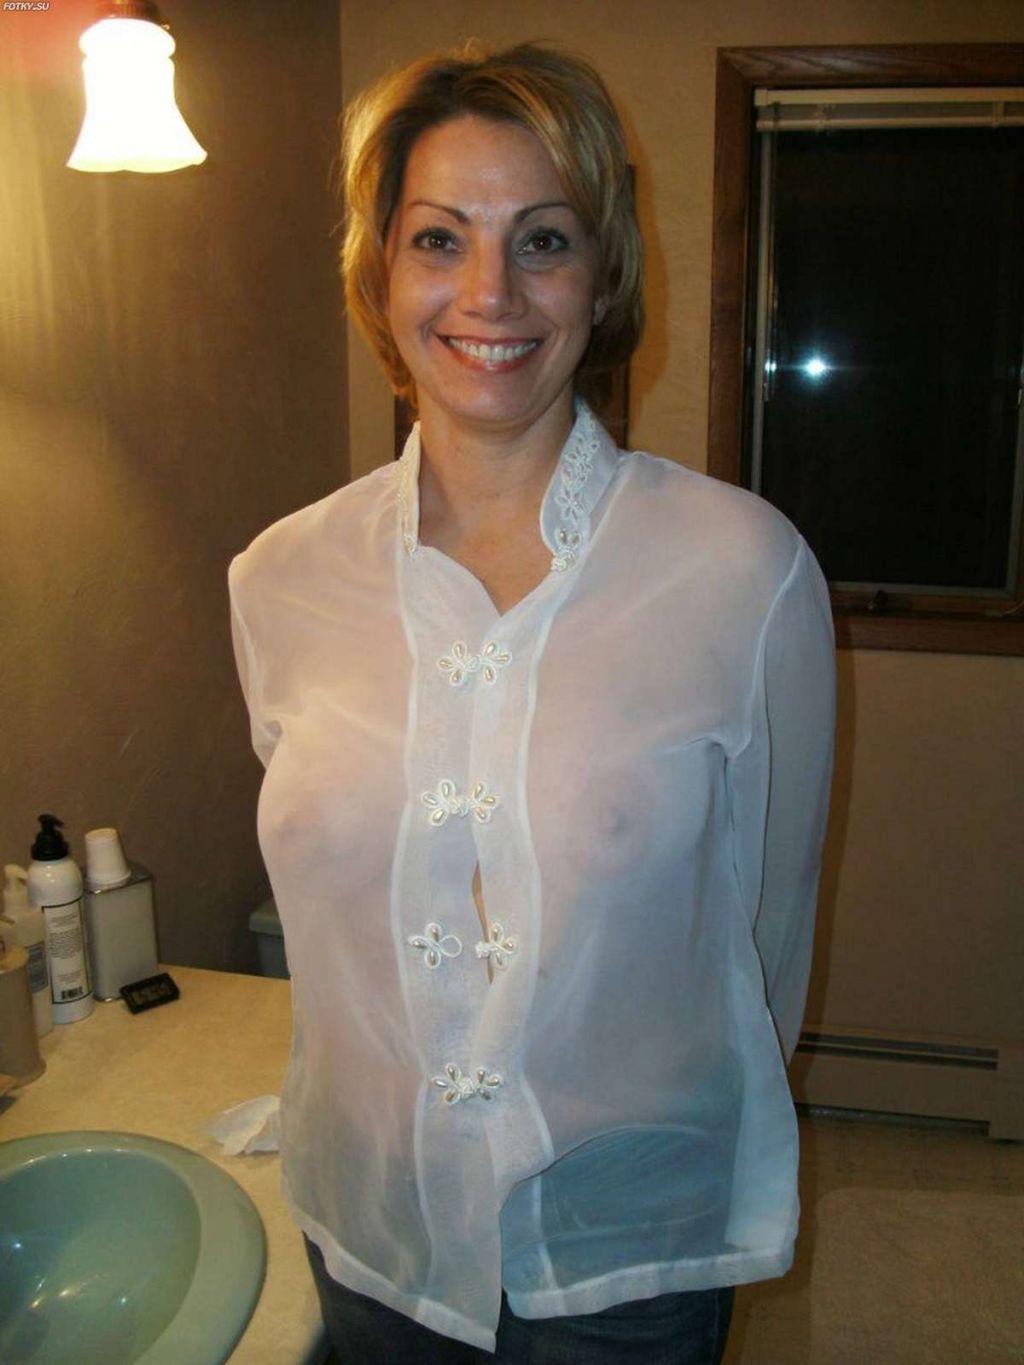 Milf See Thru Photos Hot Nude Photos Comments